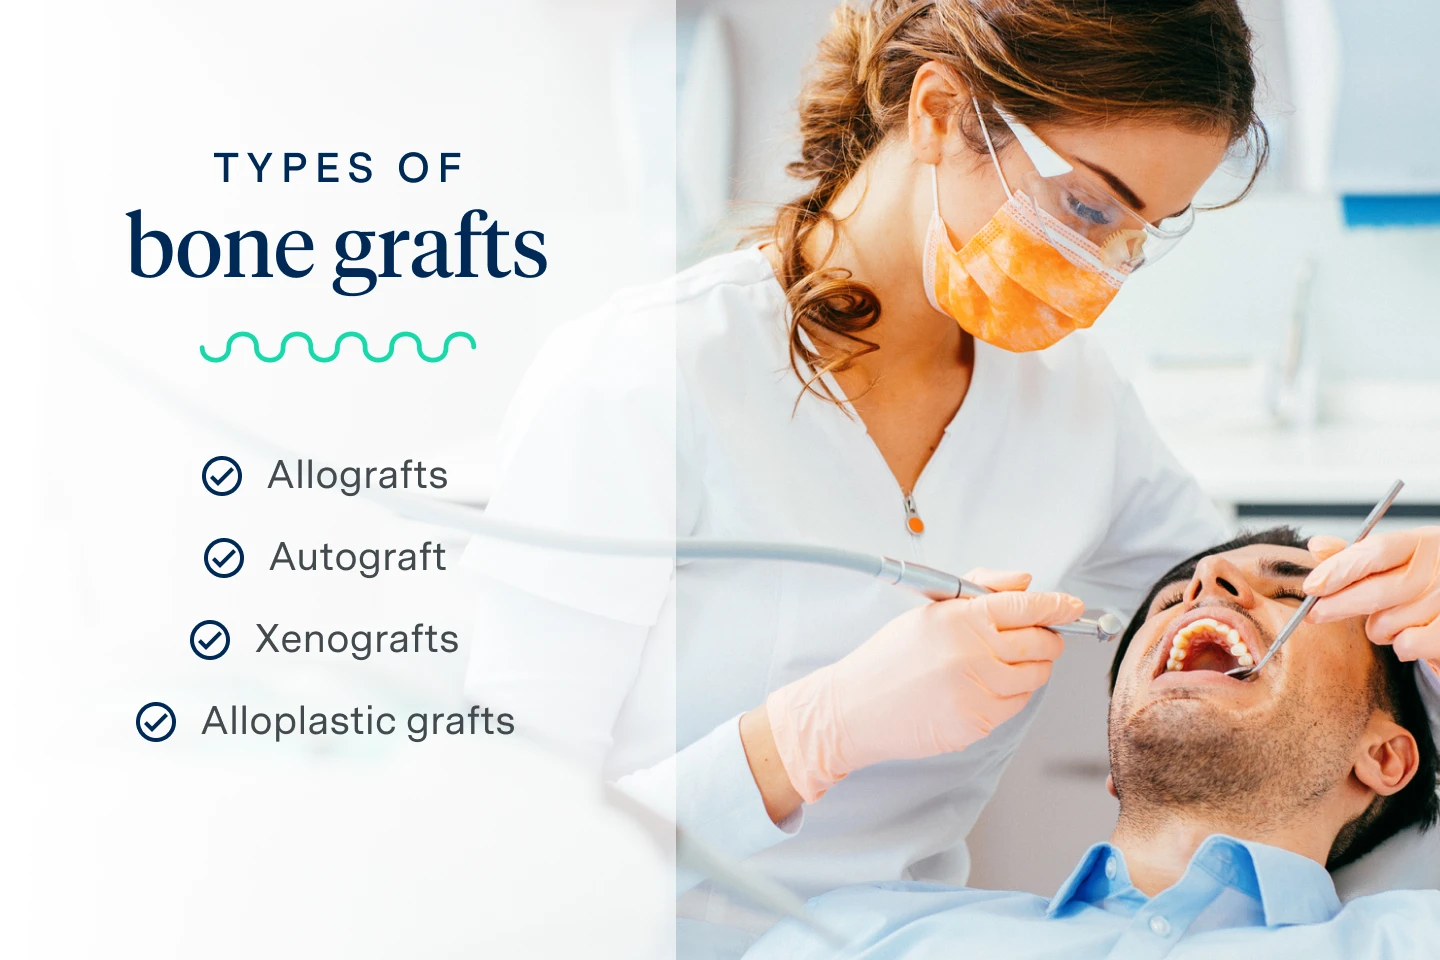 Types of bone grafts used in orthopedic surgeries to promote bone healing and fusion are: 
Autografts
Allografts
Xenografts
Alloplastic grafts